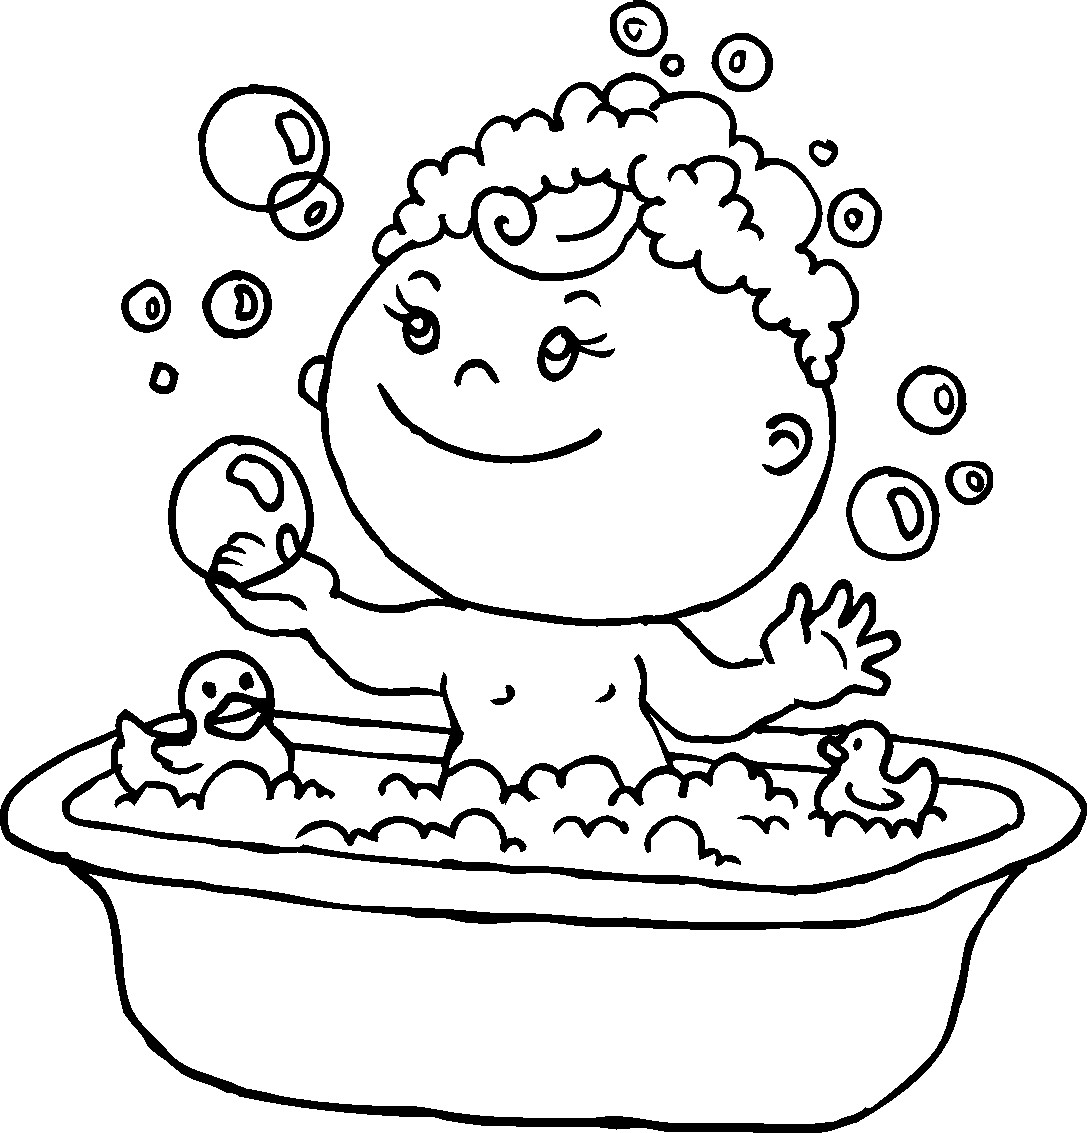 Printable Coloring Pages For Girls 10 And Up
 coloring pages for girls 10 and up Free